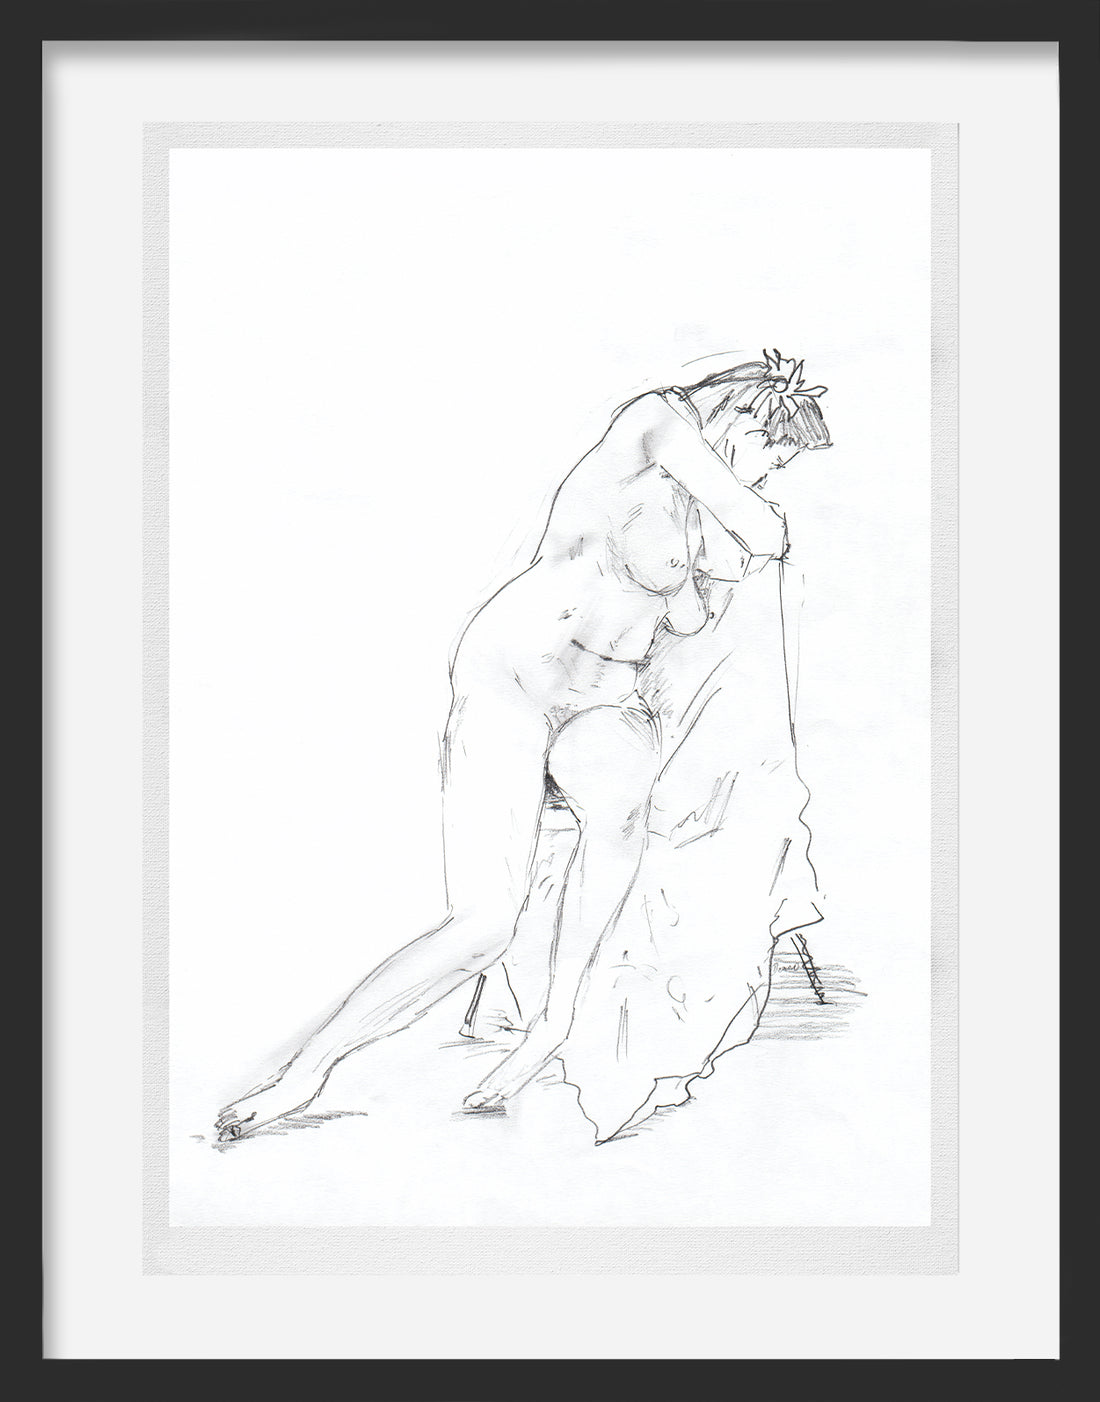 A limited edition print of a naked female figure seated on a chair, with a sheet draped over it and facing towards the right, looking over the back of the chair.